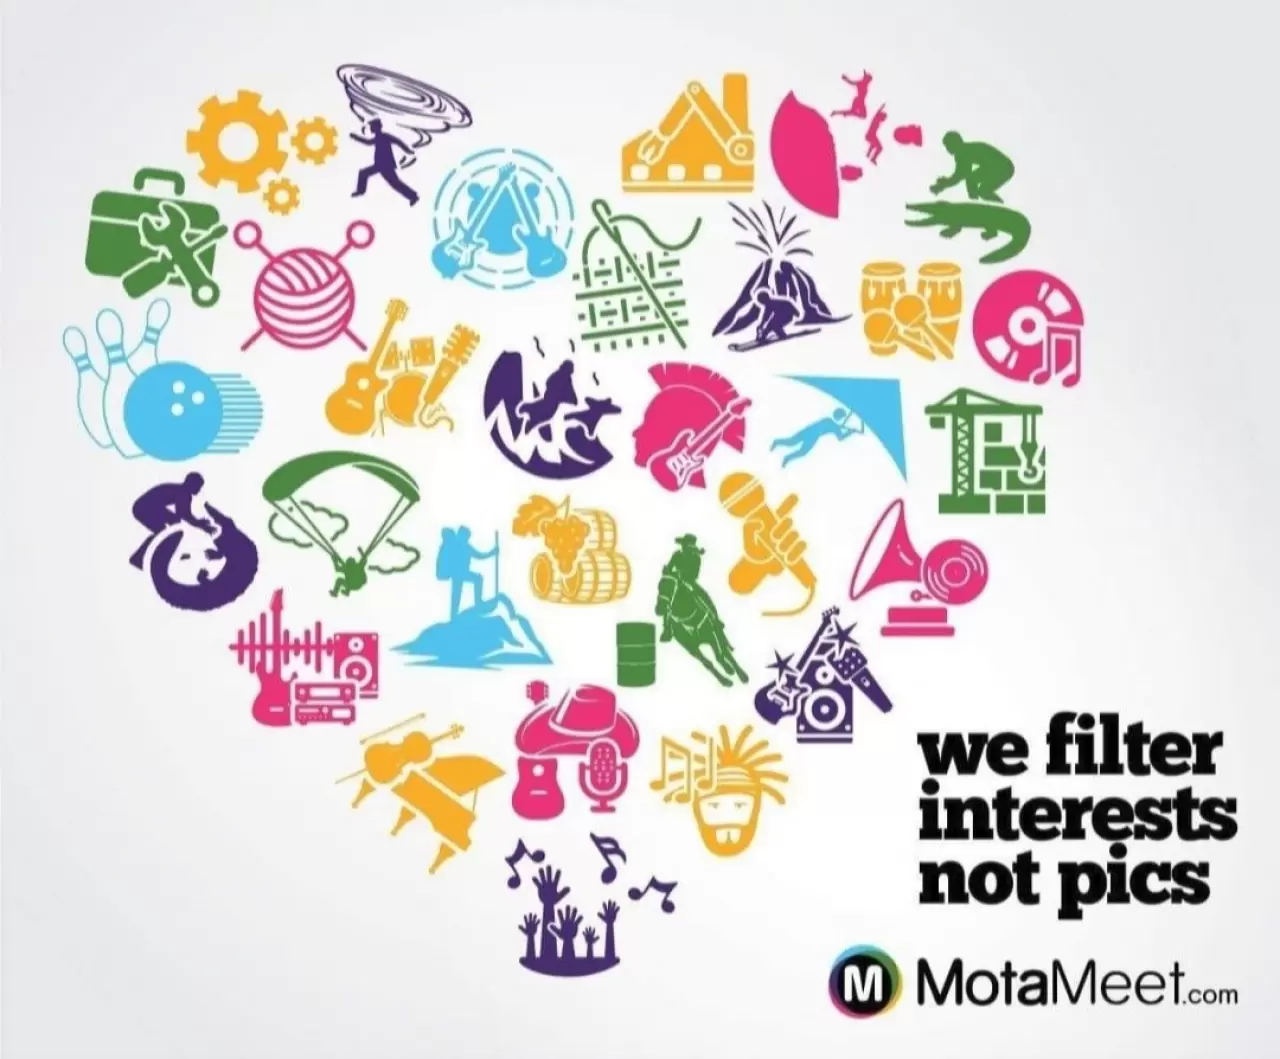 MotaMeet, the New Social App Re-Defining the Way People Connect img#2